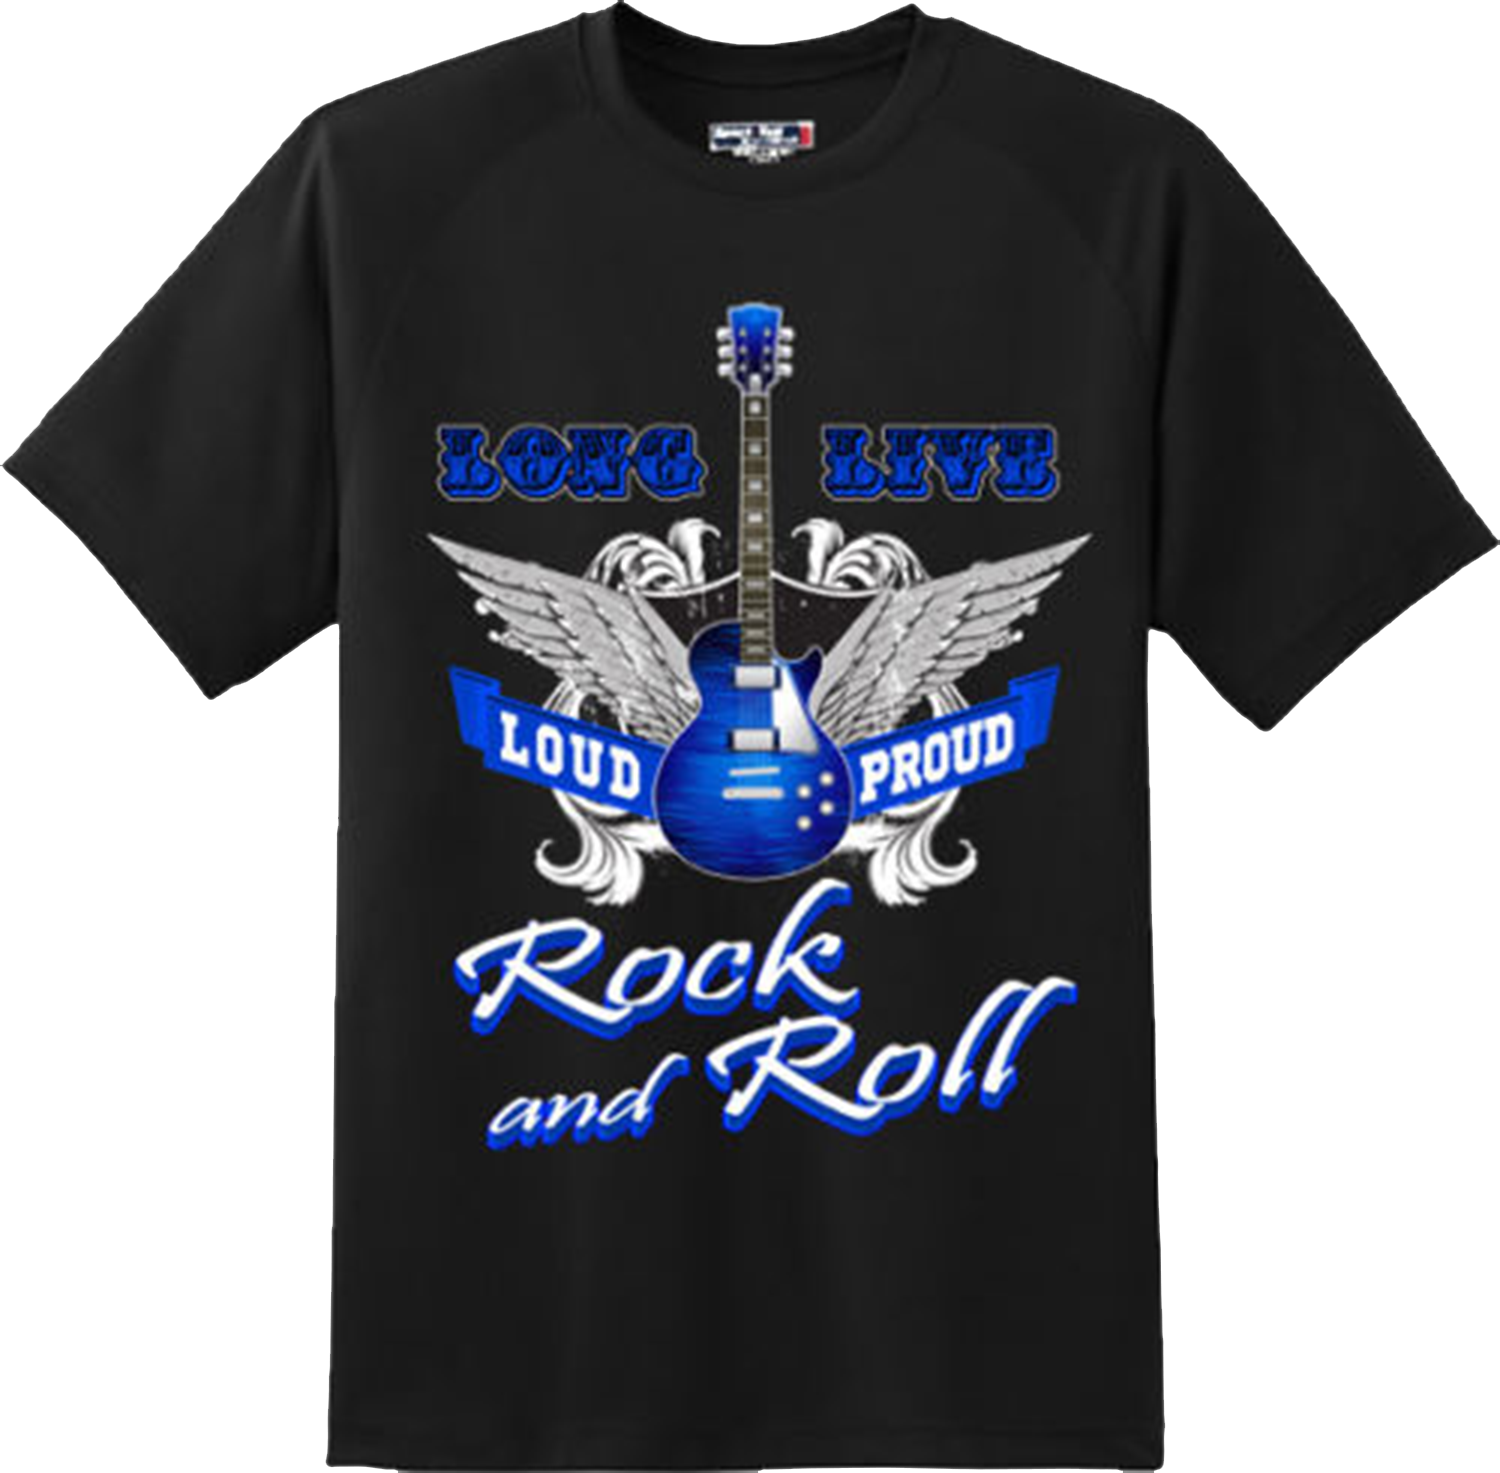 Long Live Rock And Roll Guitar Music T Shirt New Graphic Tee